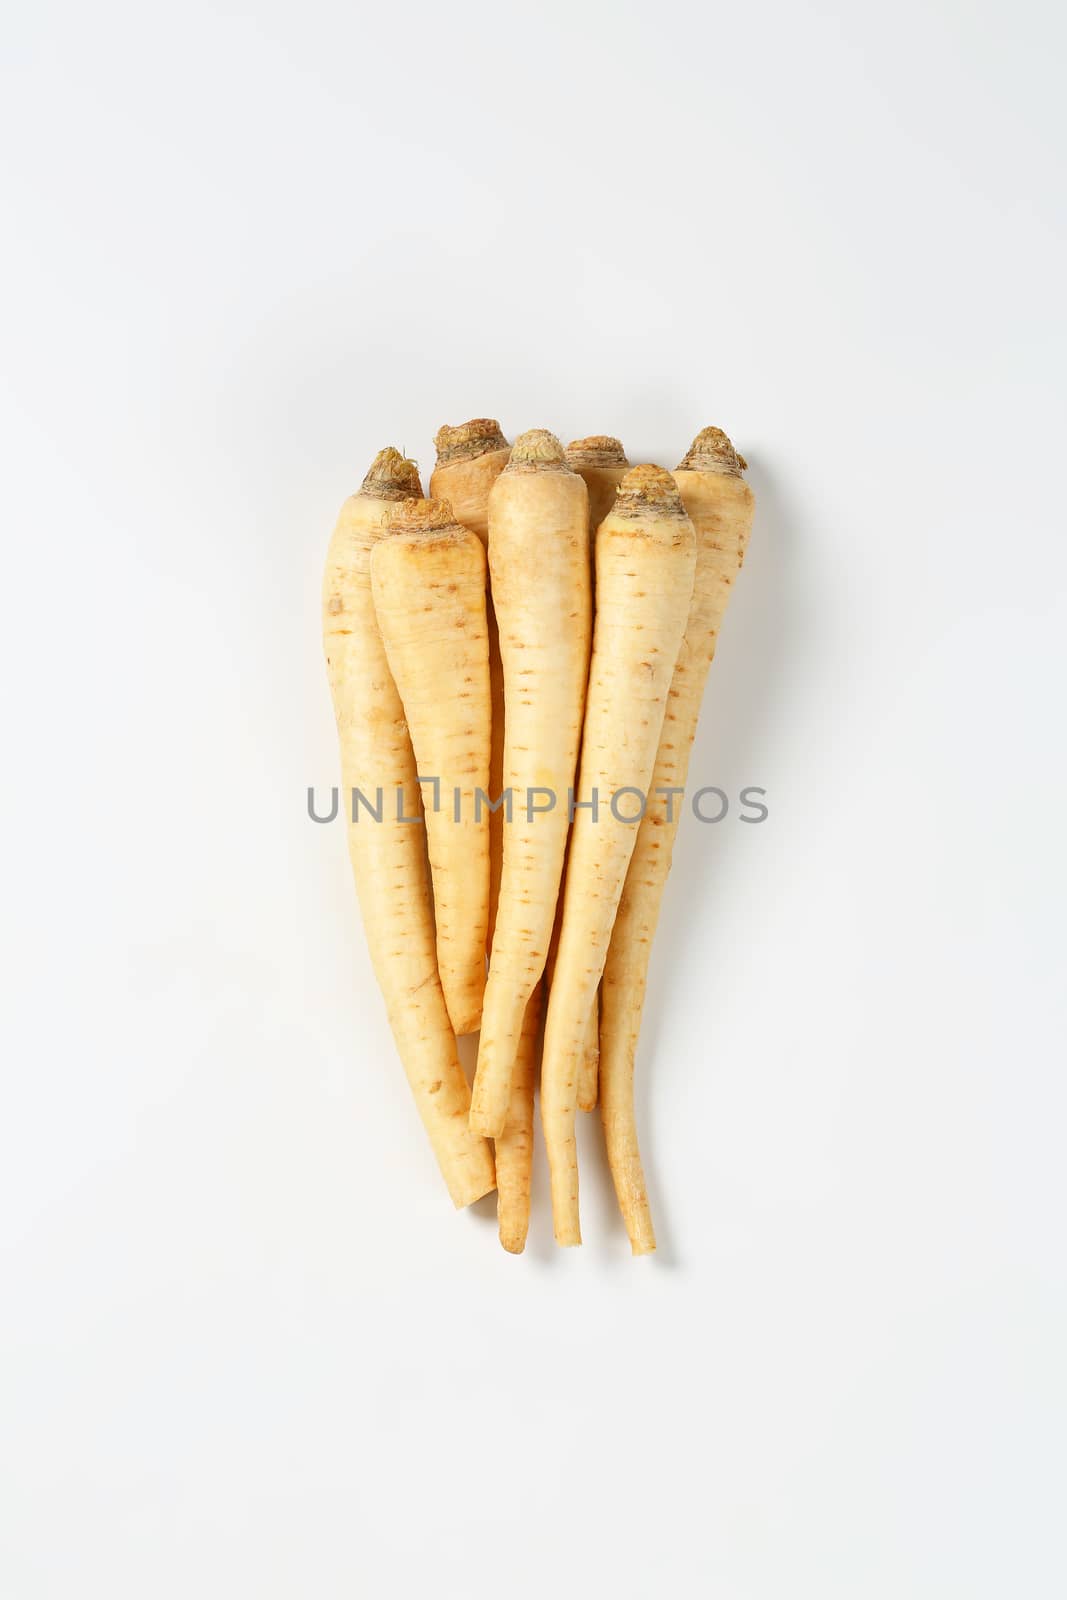 bunch of fresh parsley roots on white background